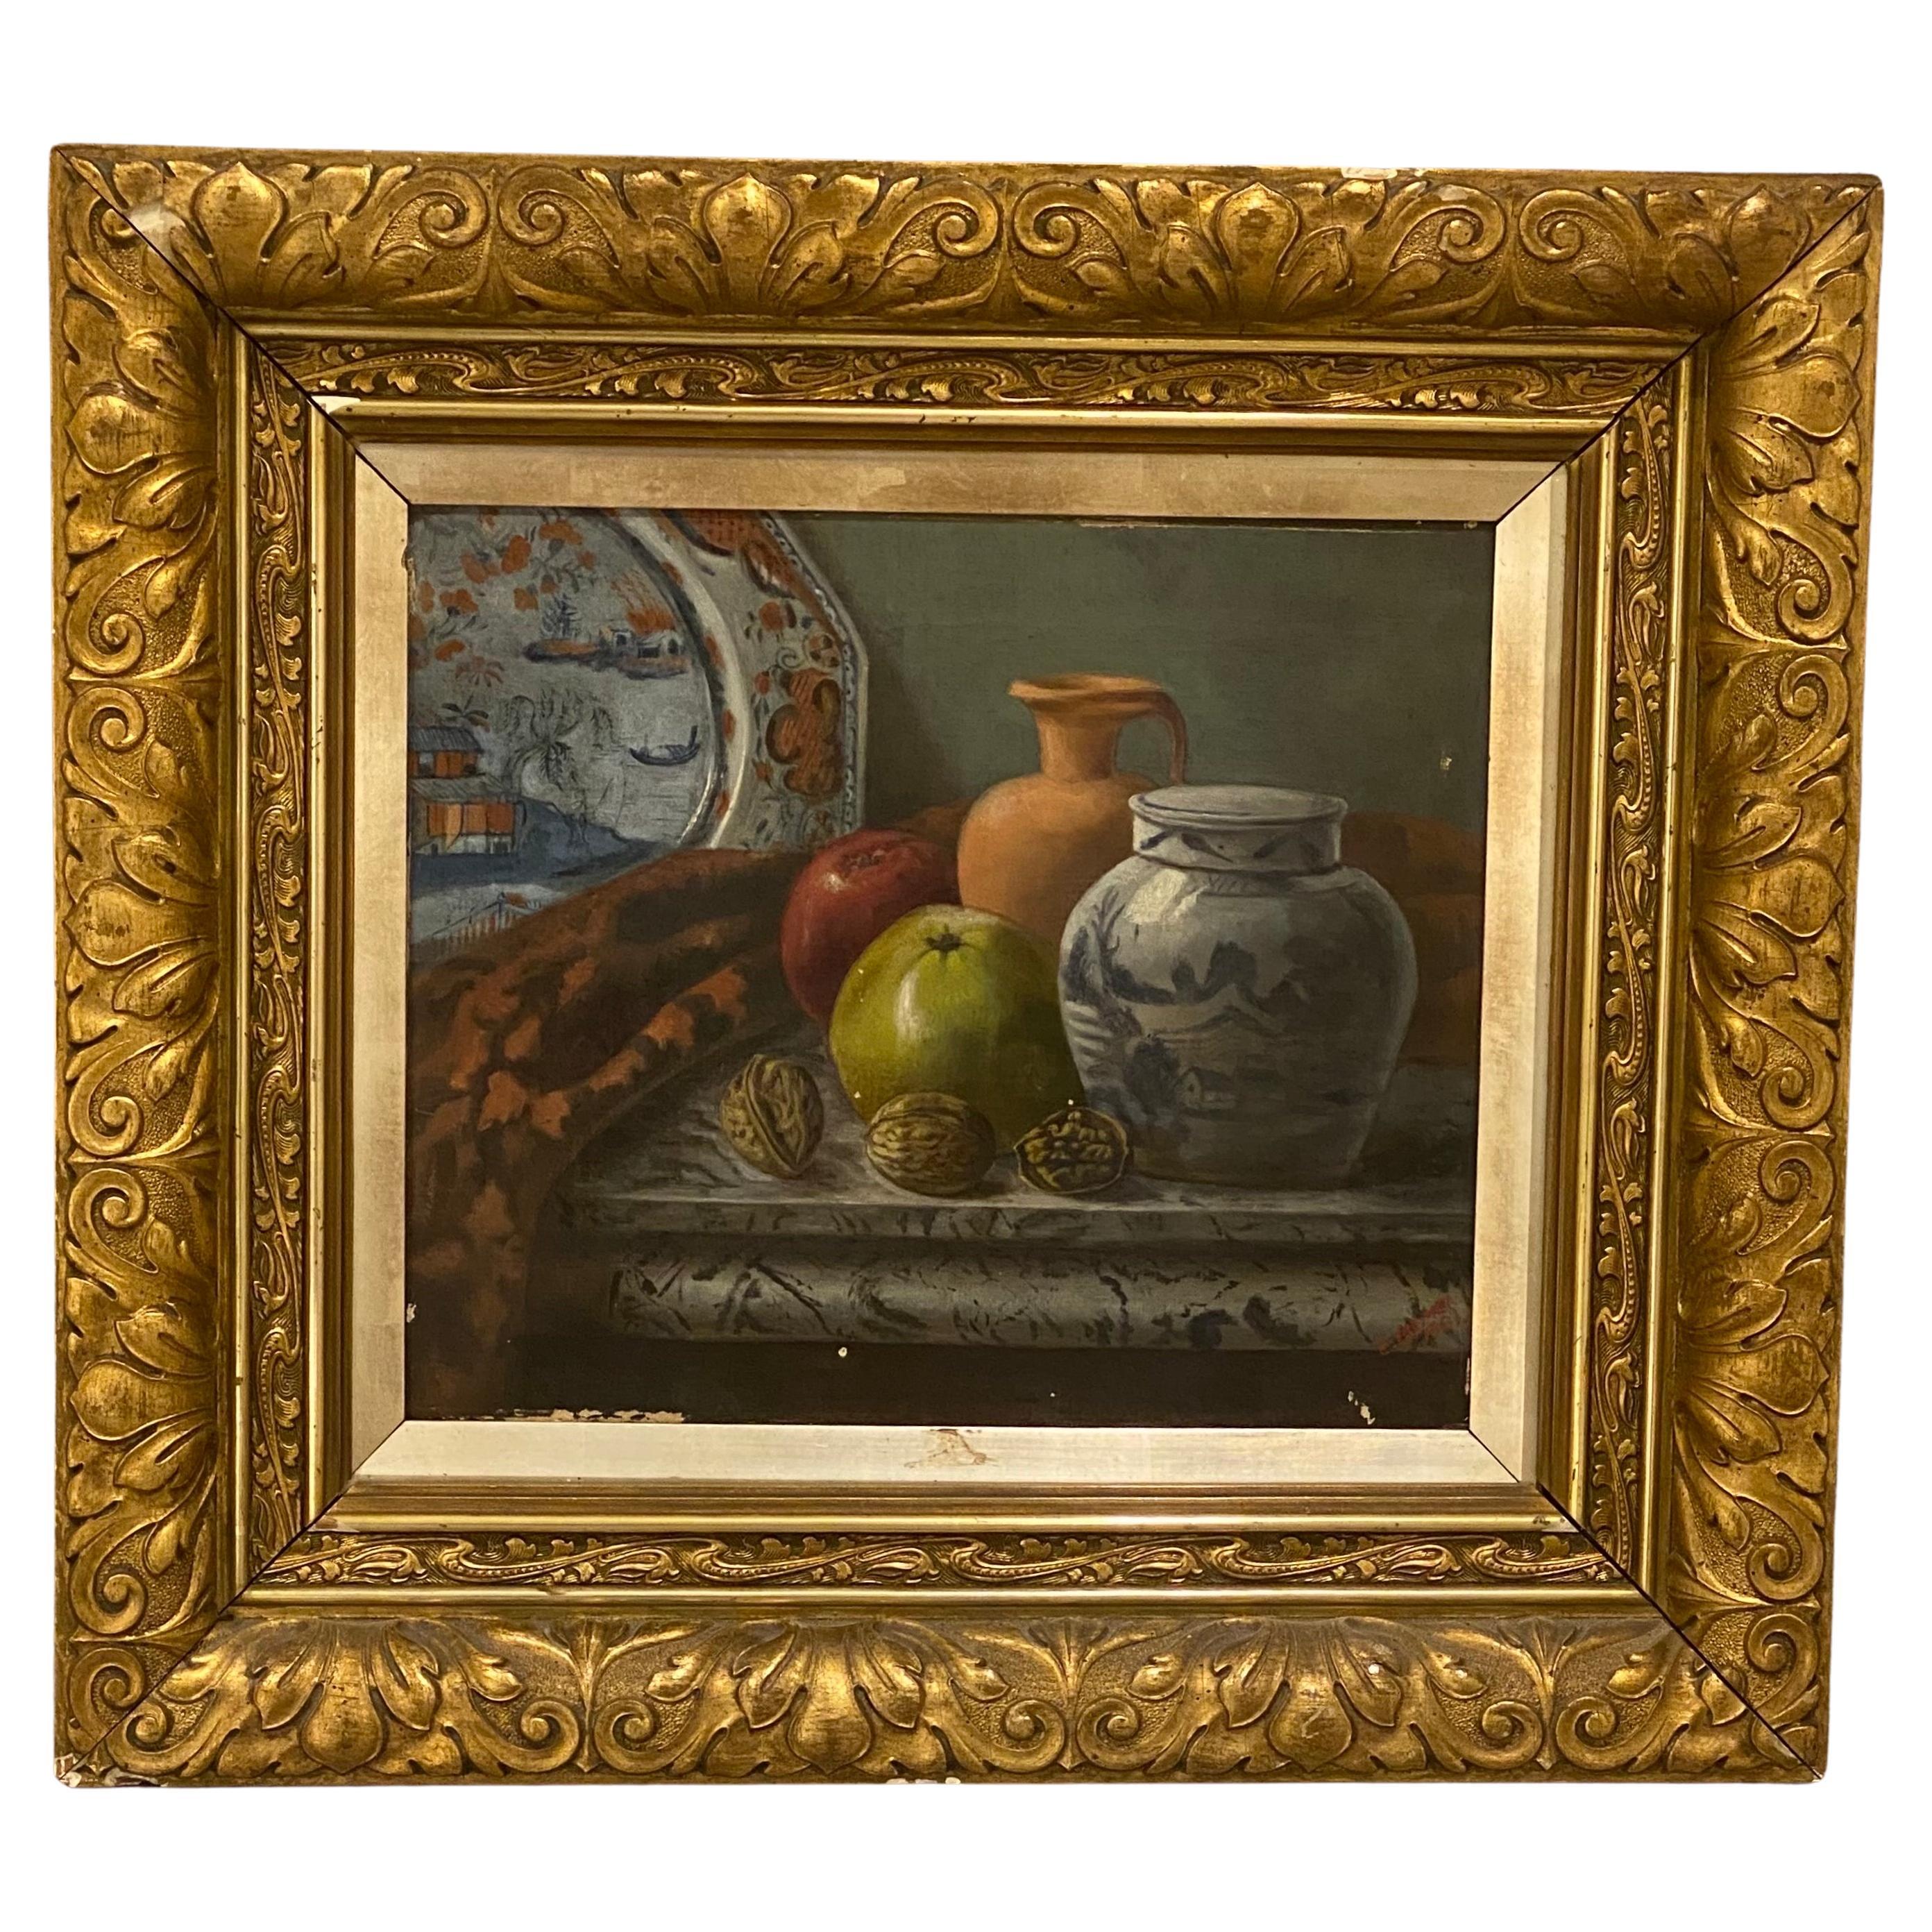 An original large late 19th century oil on canvas still life of Fruits Nuts and Early Objects by artist E. Cremer. signed and dated at the lower right. Housed in its superb quality original gilt frame from the same period. The sizes are Picture: 14